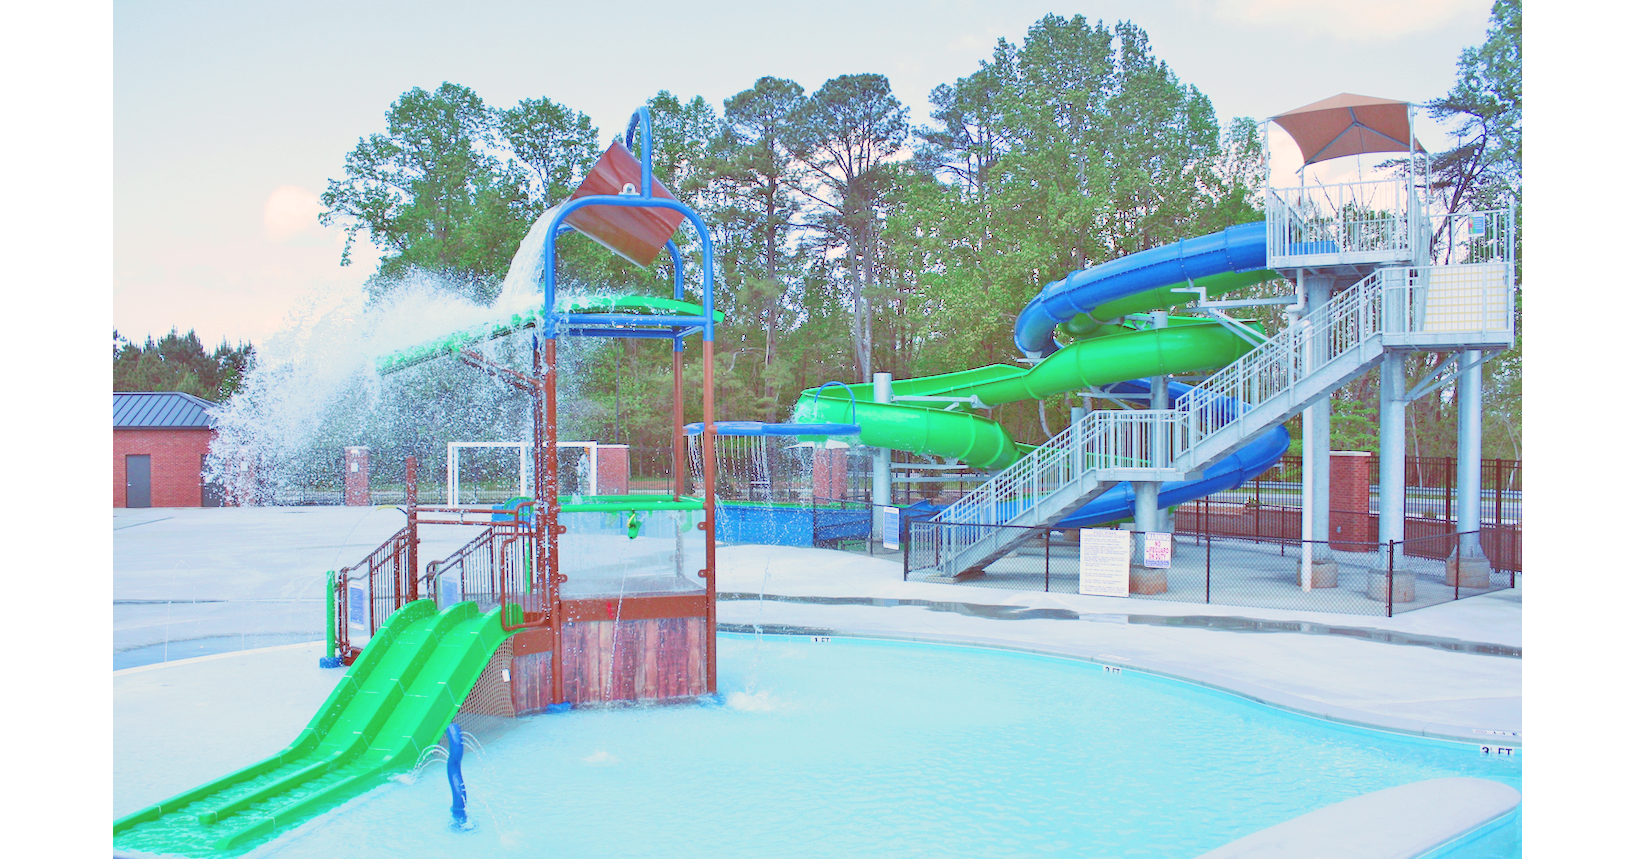 The Pinetree Recreation Center will hold a grand opening and ribbon cutting on May 25.